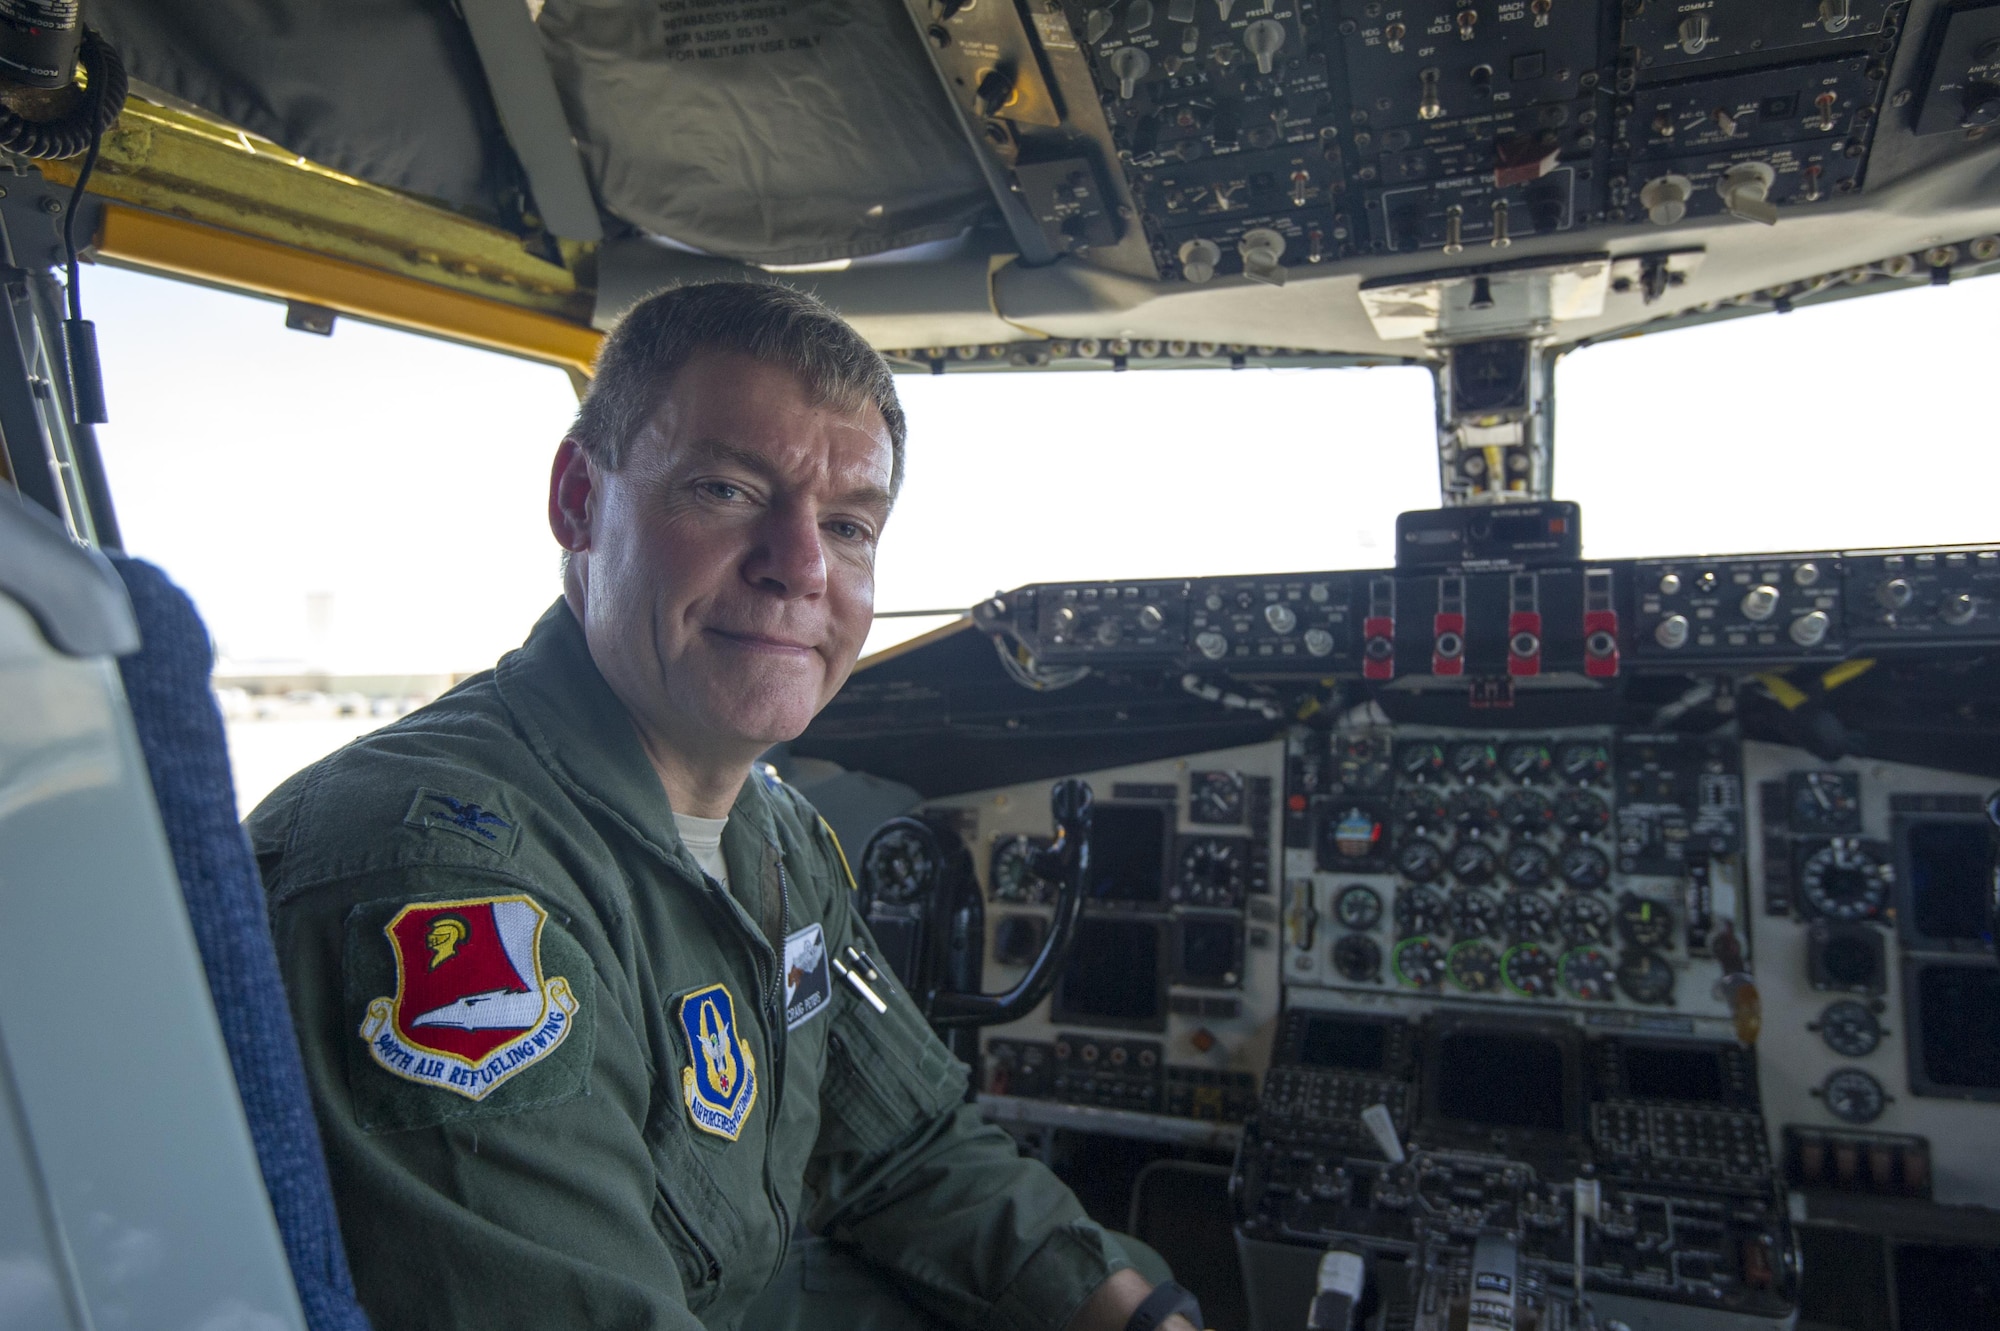 Col. Craig C. Peters, 940th Air Refueling Wing commander, sits in the cockpit of a KC-135 Stratotanker April 4, 2017, at Beale Air Force Base, California. Peters assumed command of the 940 ARW in June 2016. (U.S. Air Force photo by Senior Airman Tara R. Abrahams)